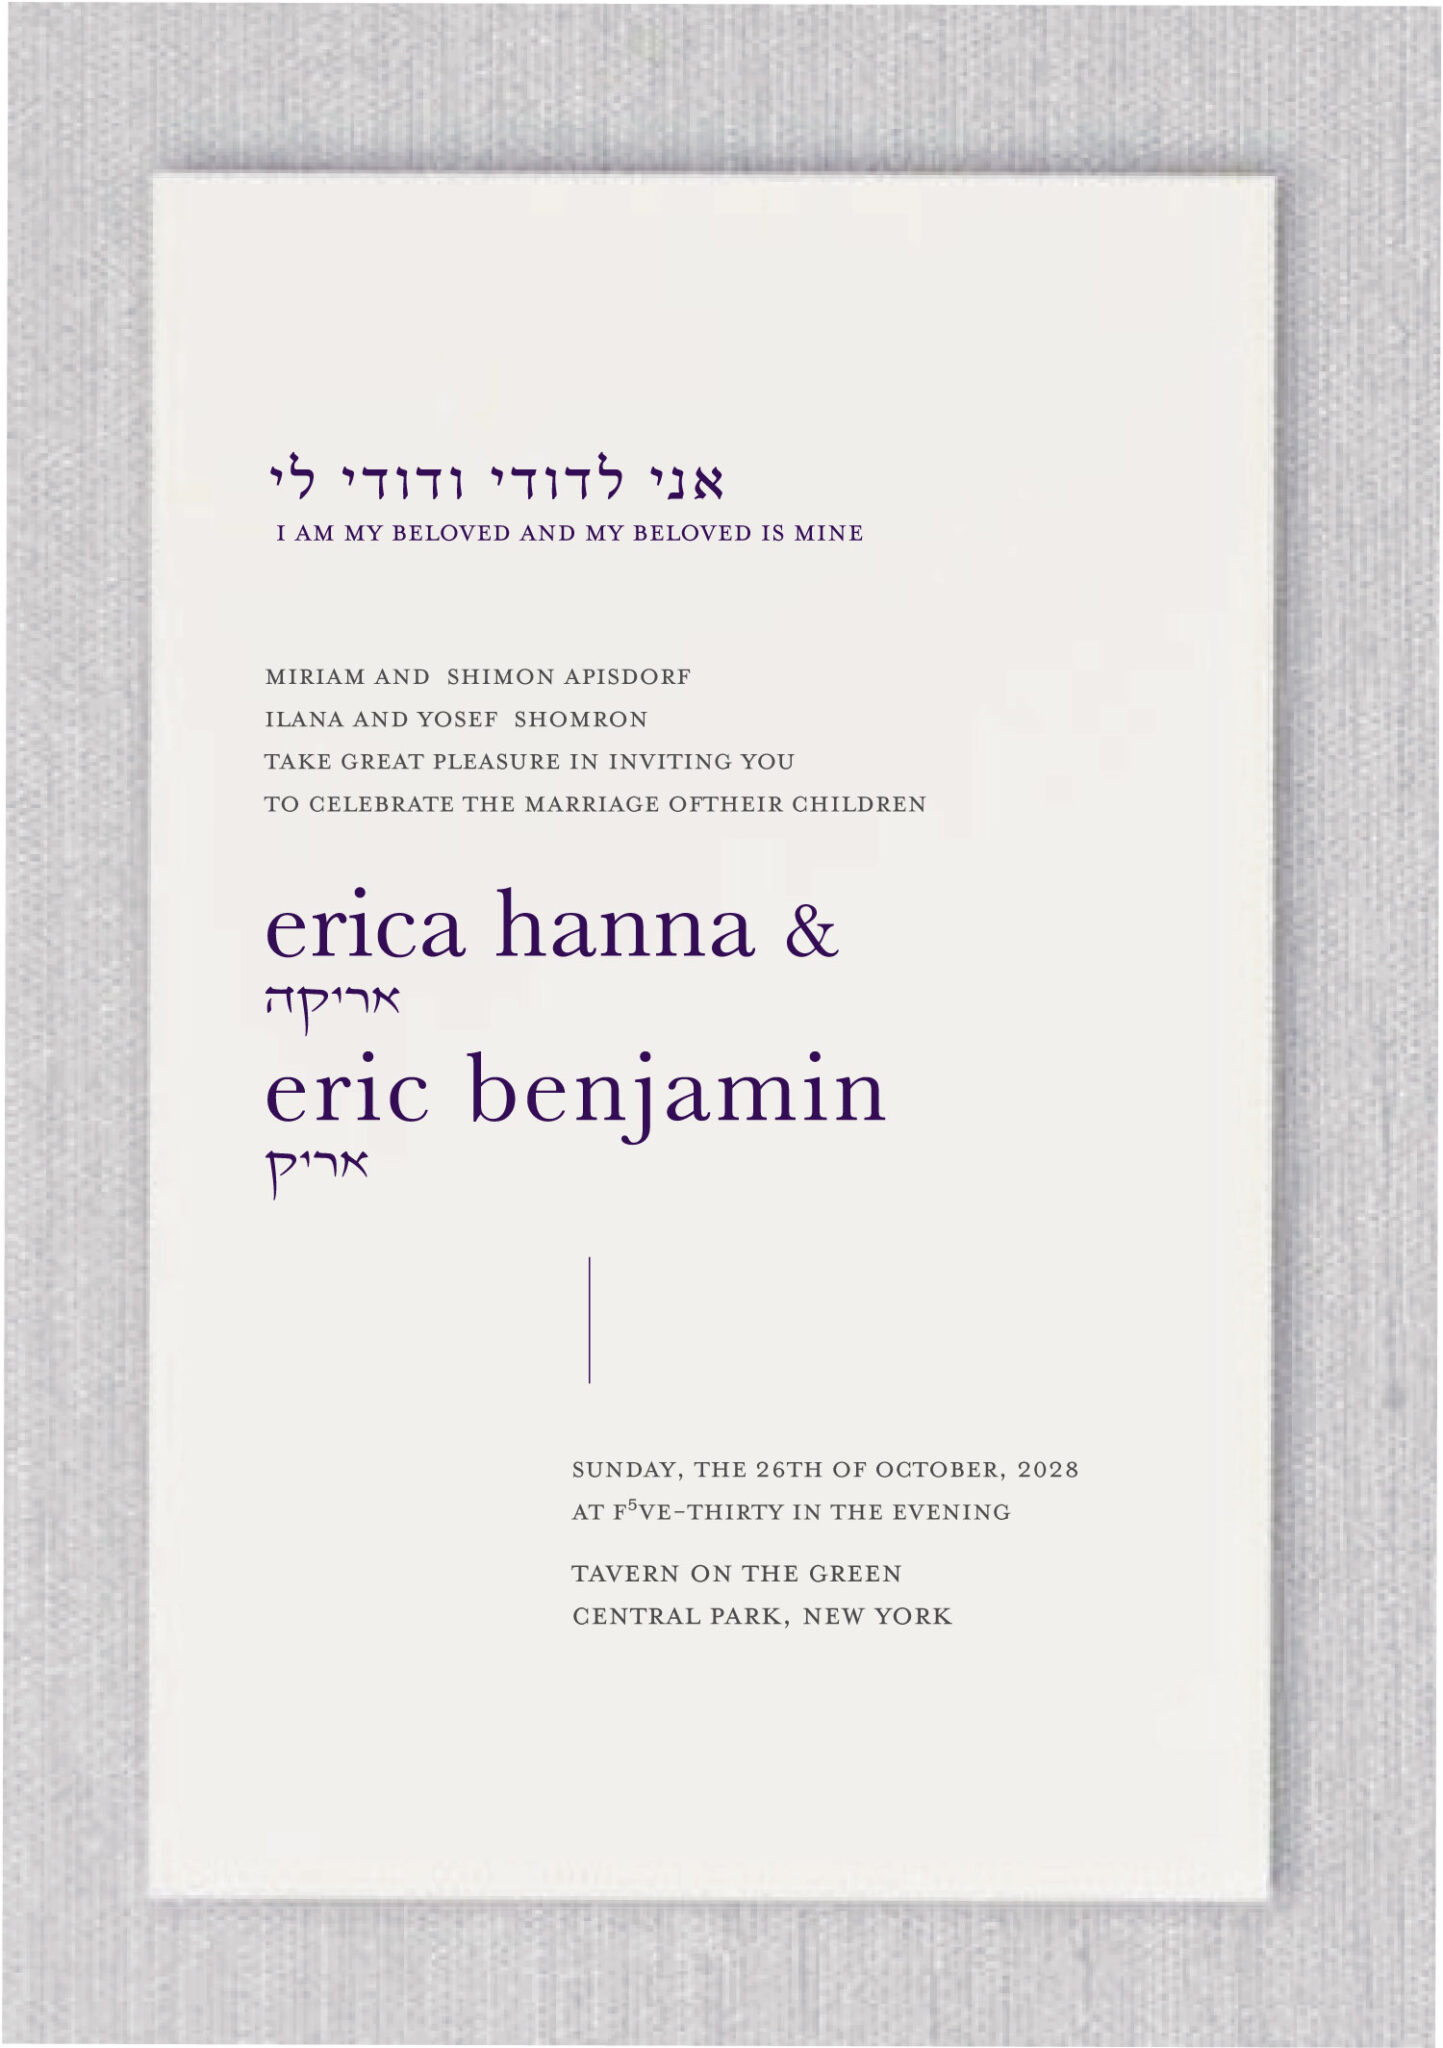 This refined, minimal wedding invitation highlights the elegance of the occasion with a simple Hebrew and English text layout in plum and charcoal.